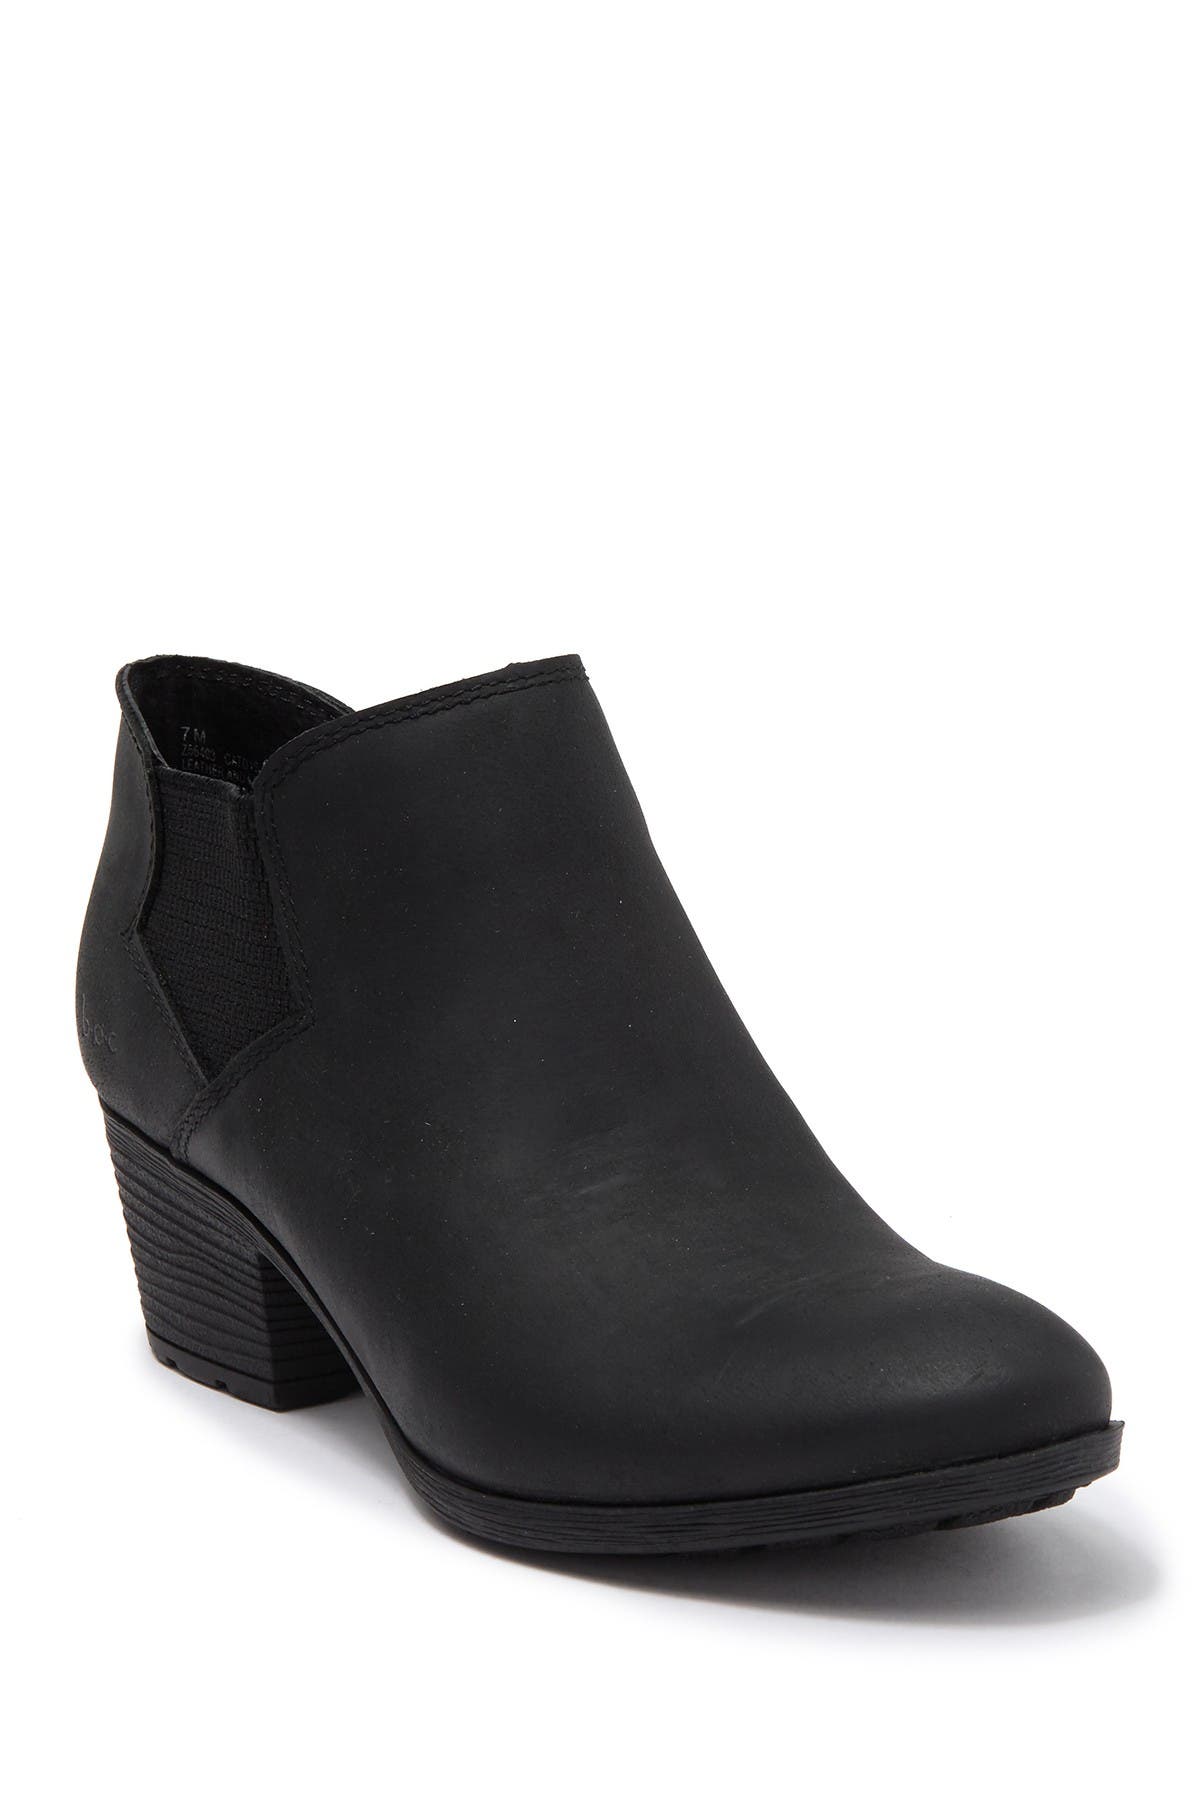 B.O.C. BY BORN | Arundel Ankle Bootie 